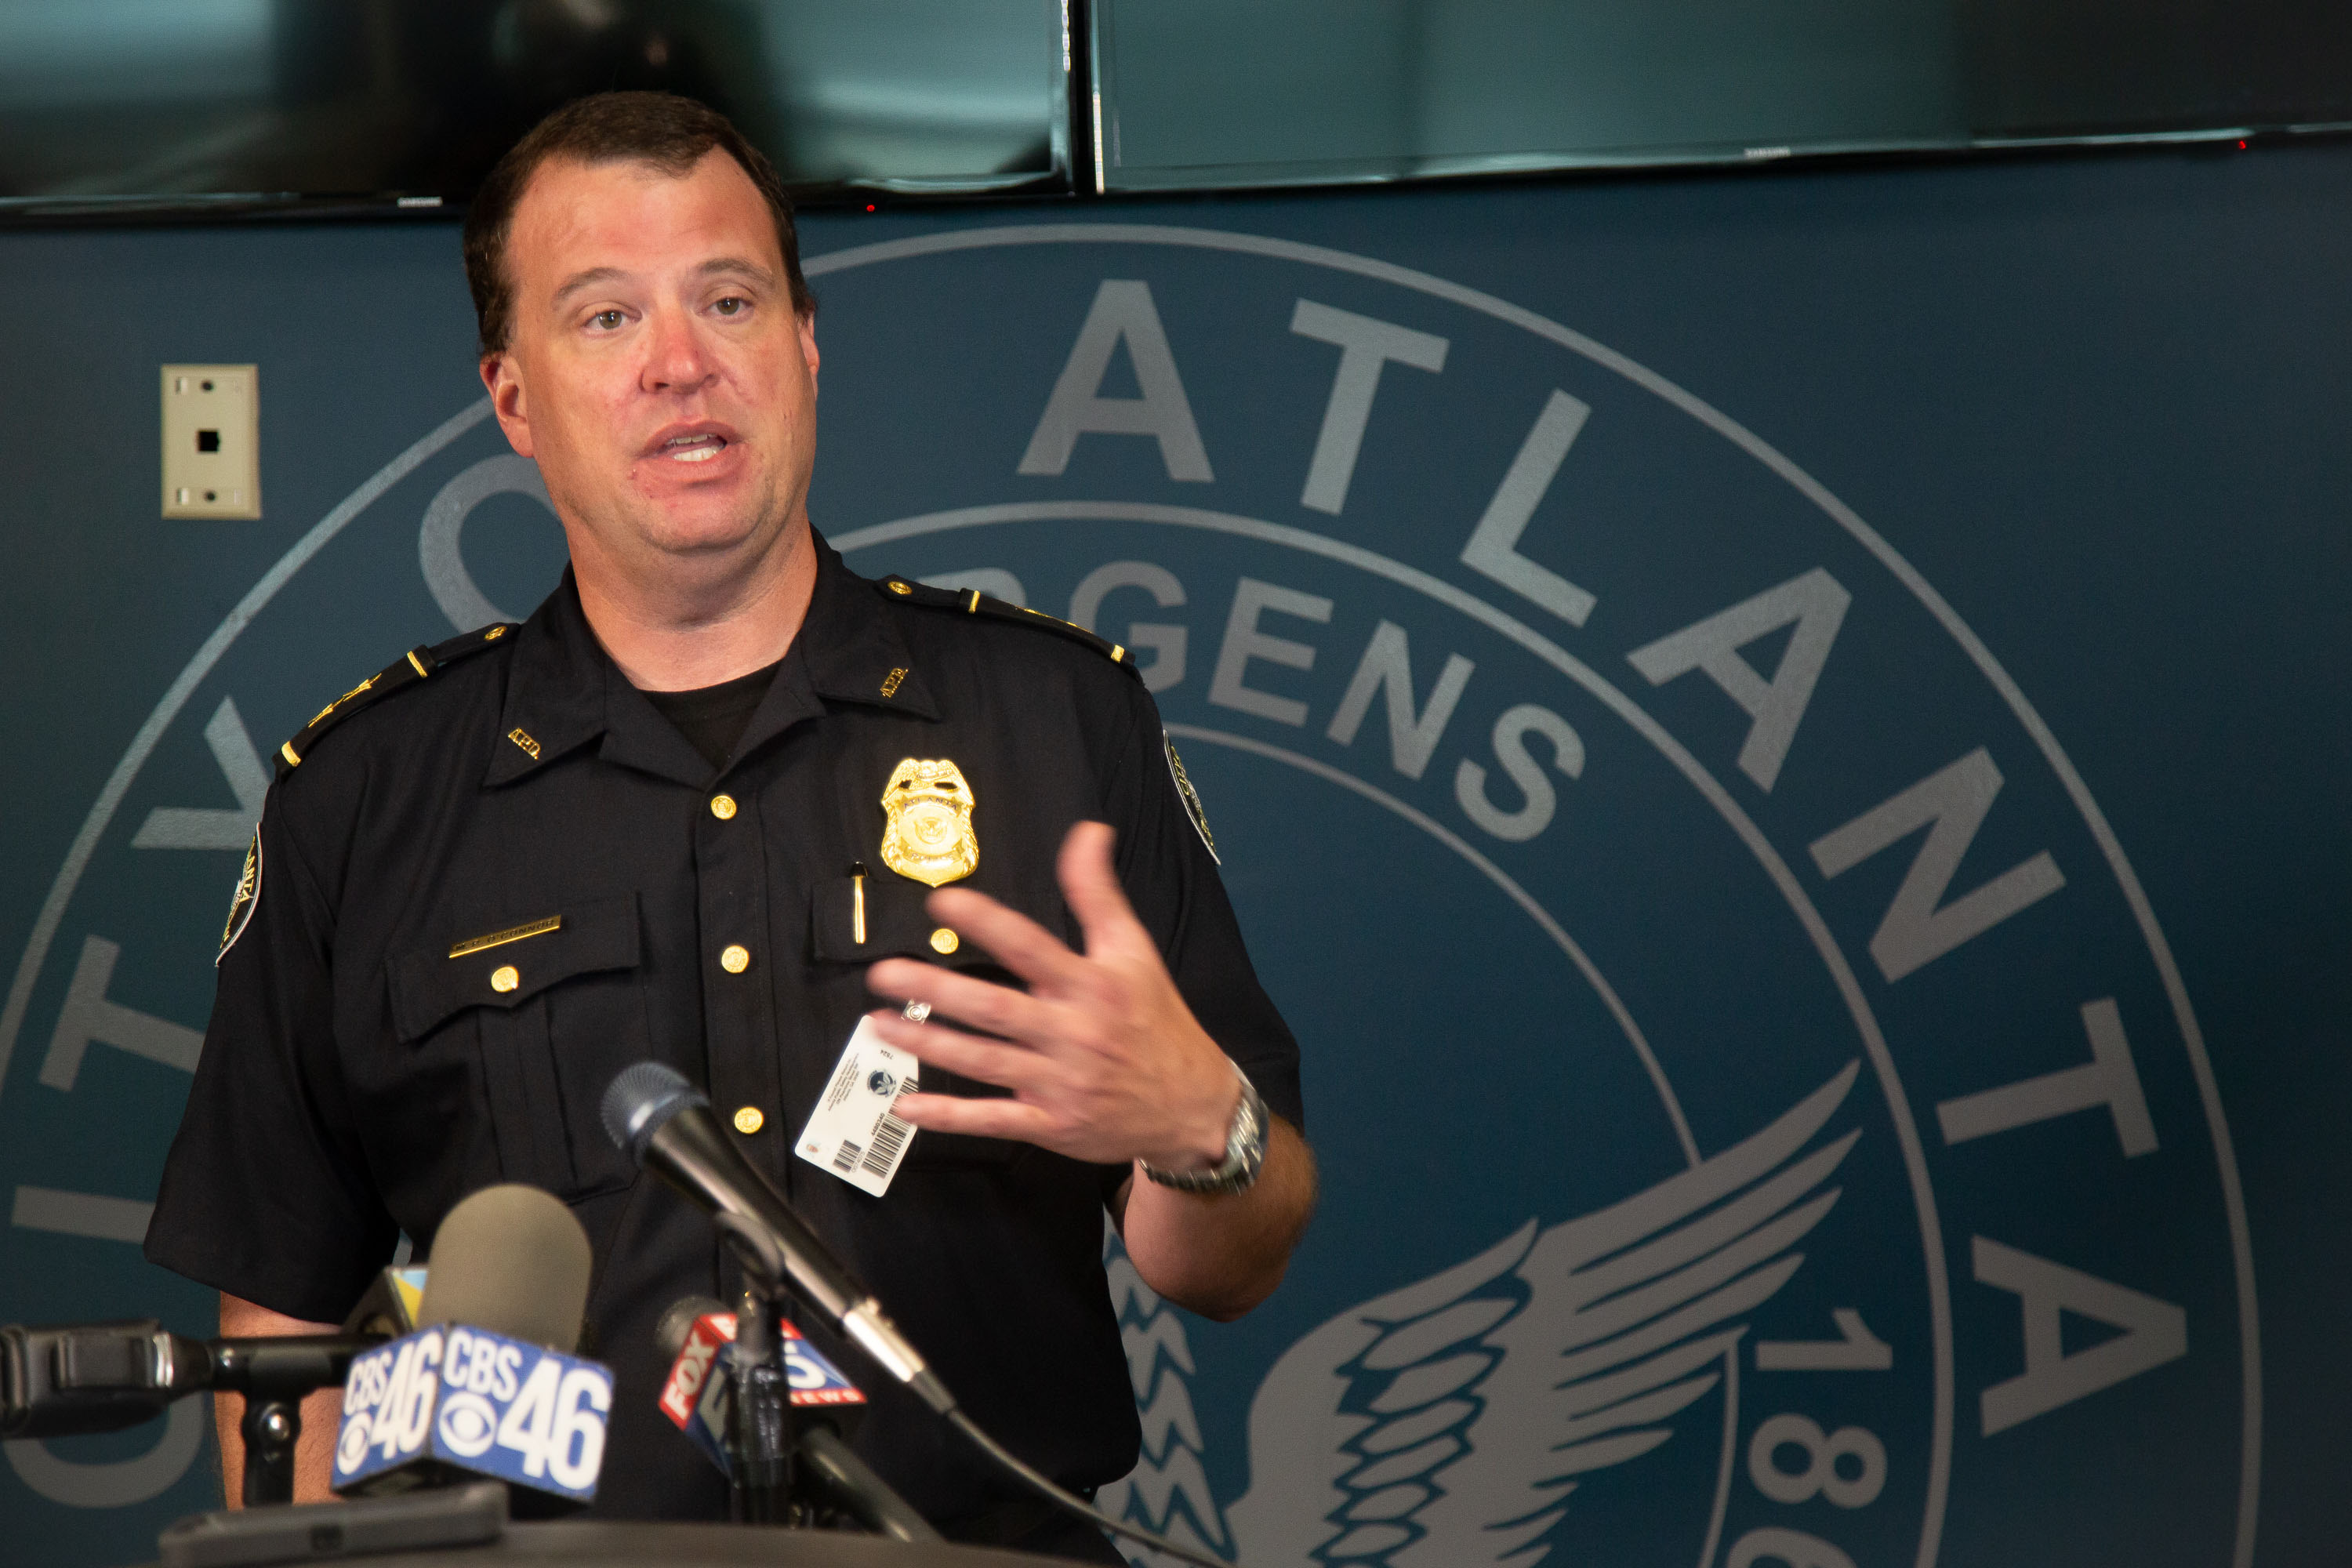 A game-changer': Atlanta police hope new camera network will help solve,  reduce crime